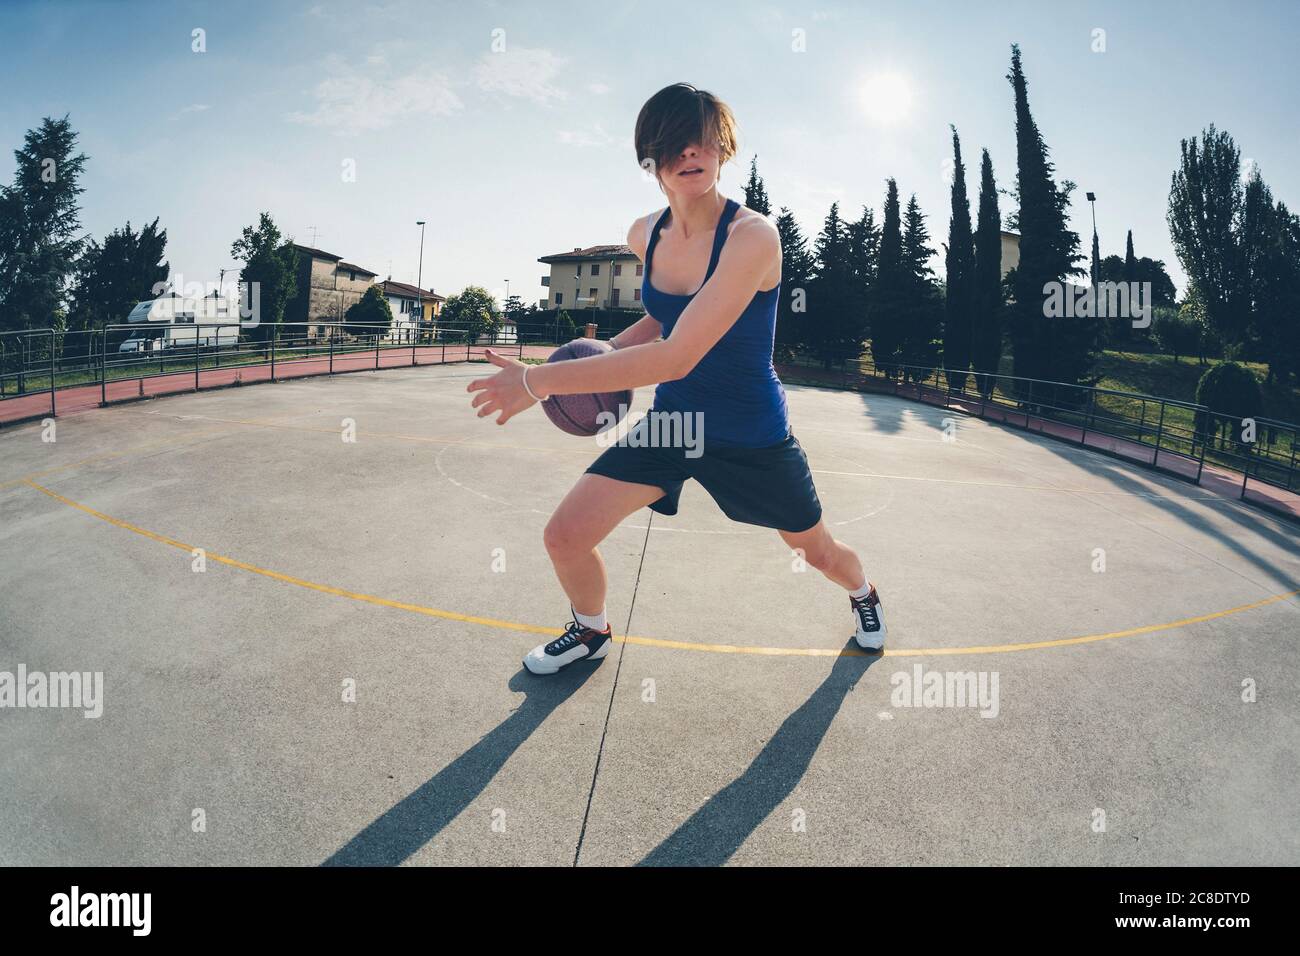 Teenage girl practicing basketball on court against sky Stock Photo